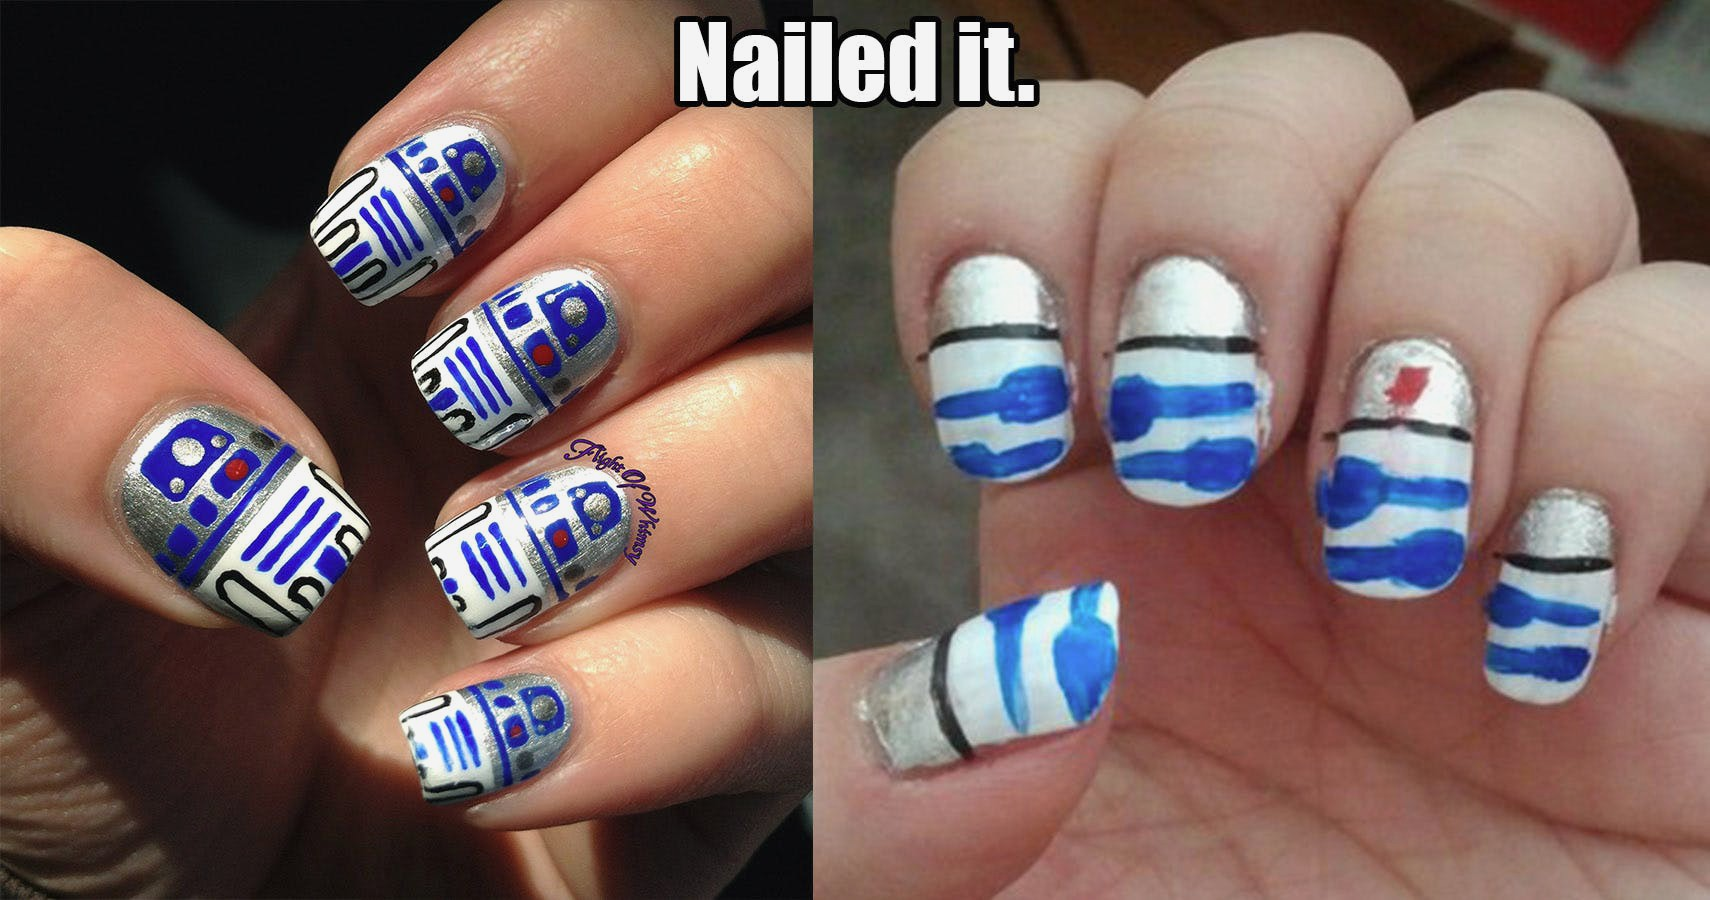 3. "10 Terrible Nail Art Trends That Need to Die" - wide 10